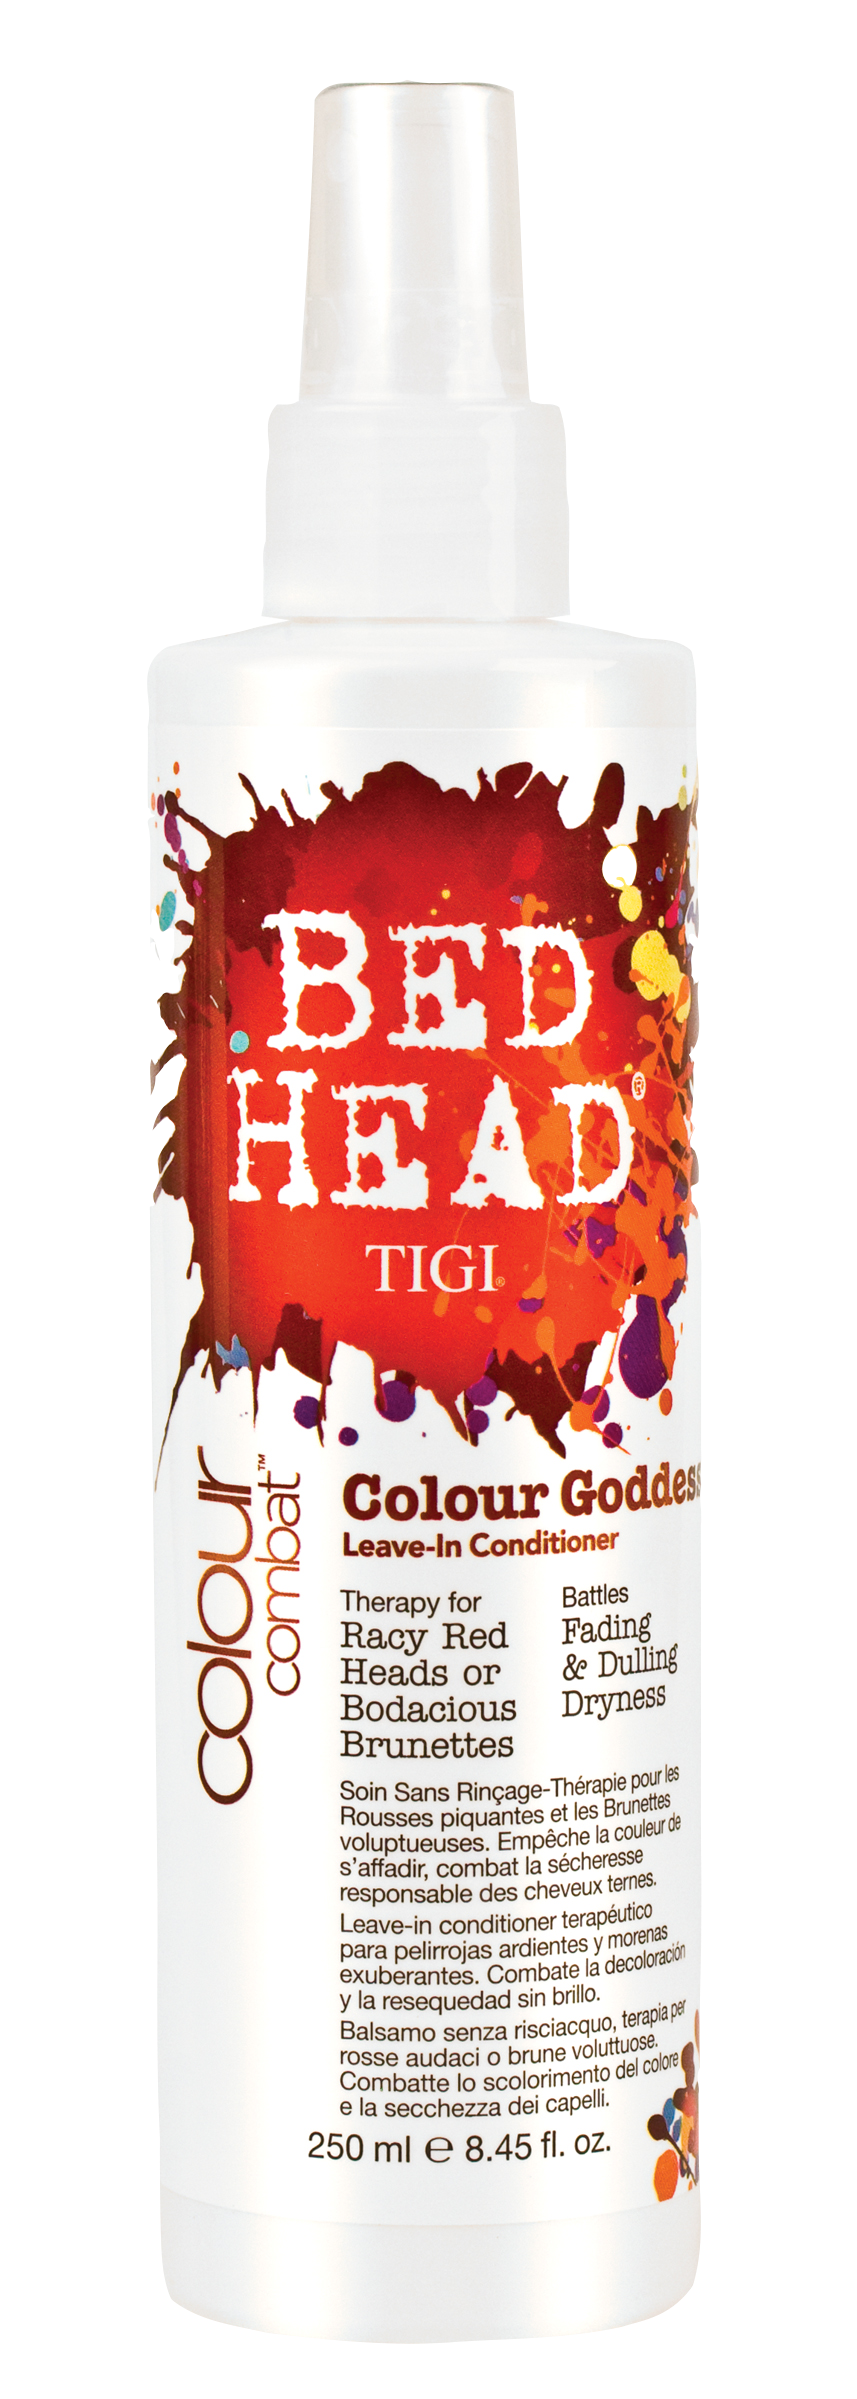 Bed Head - Color Combat - Color Goddess - Leave-In Conditioner